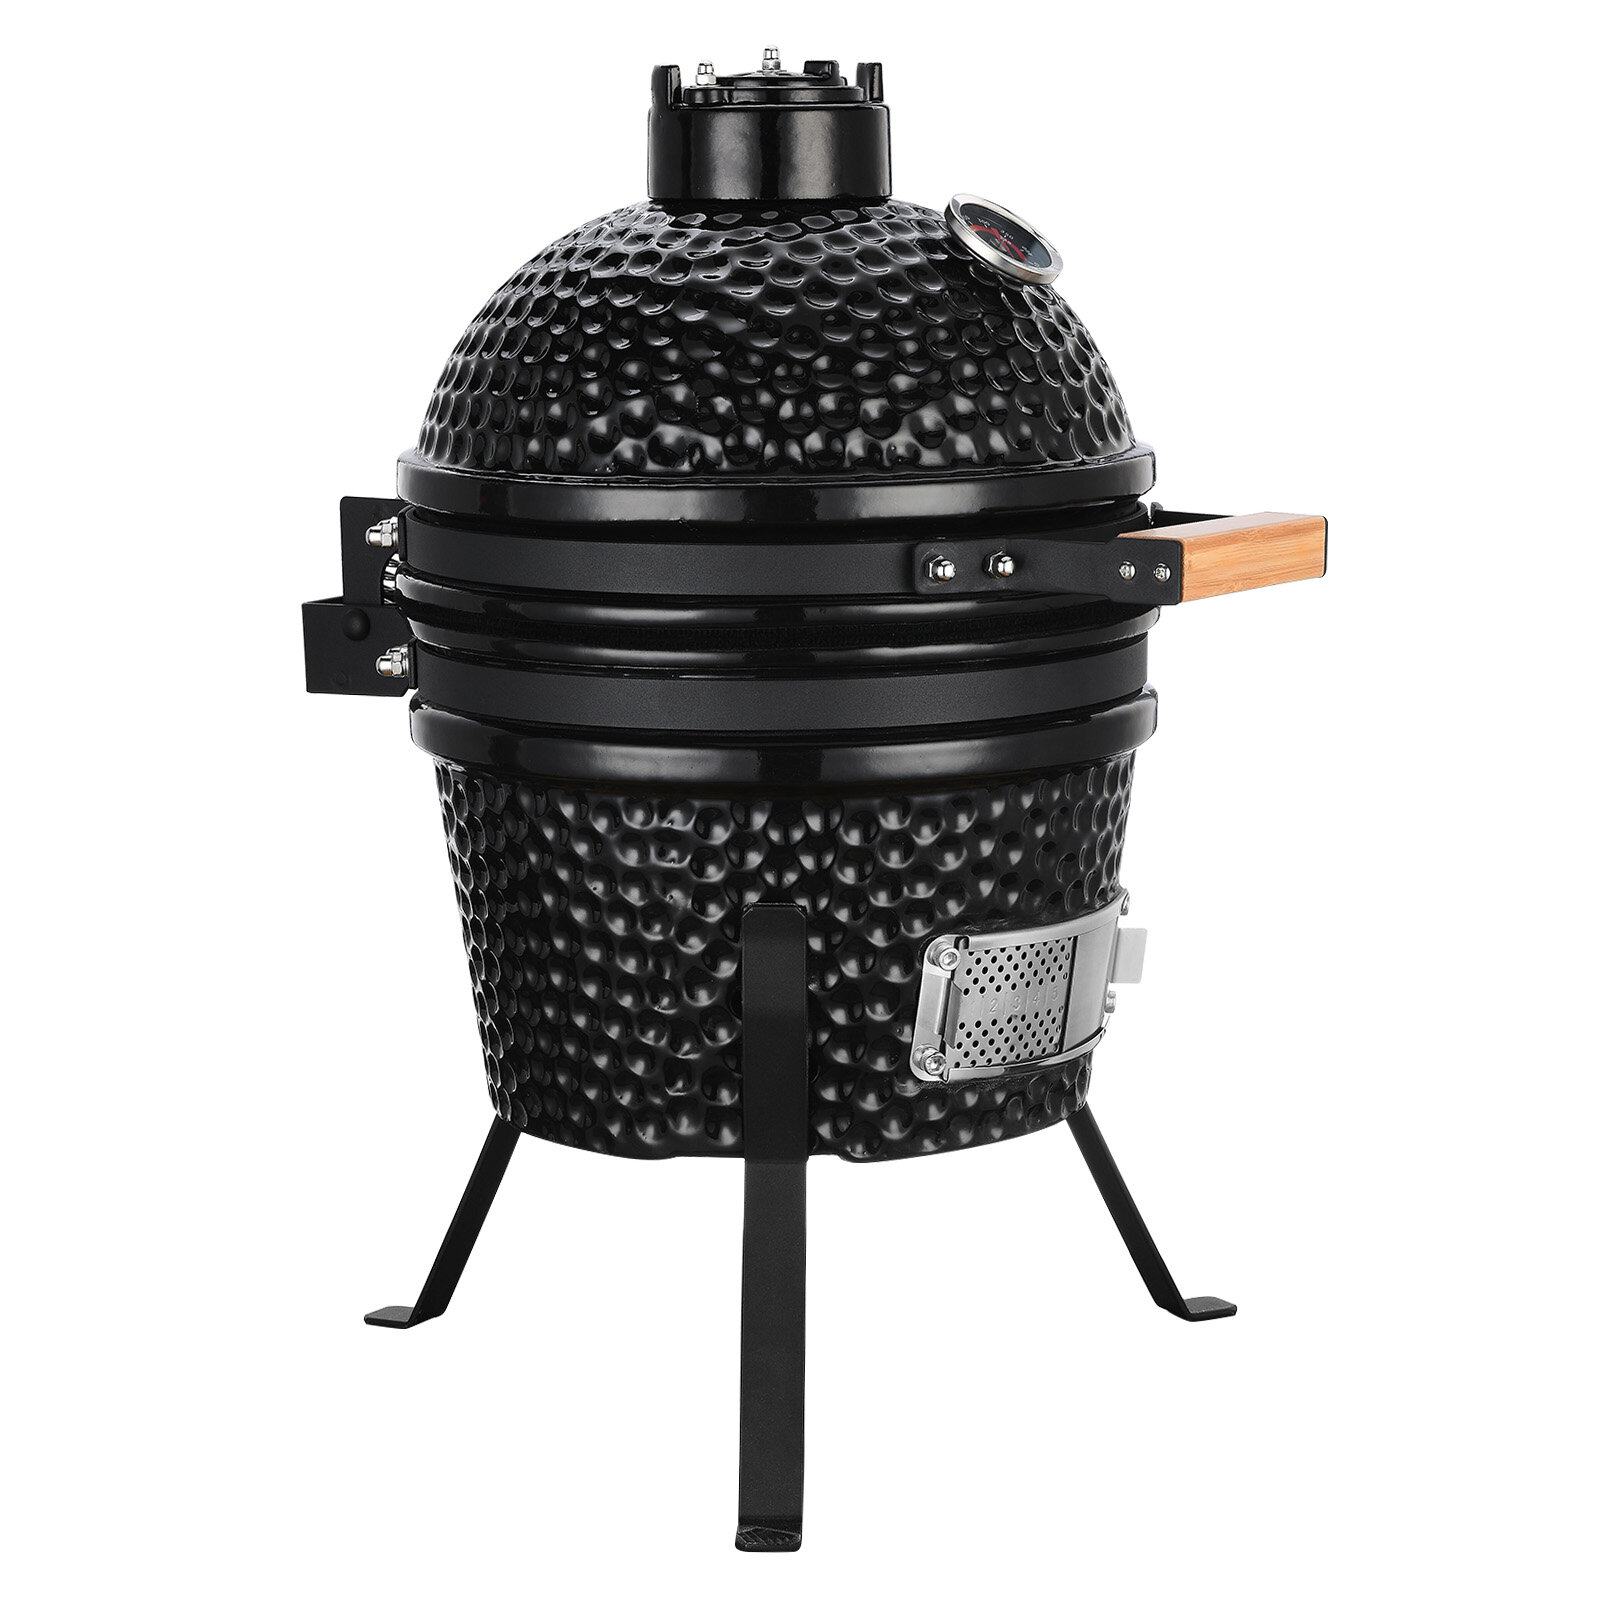 boekje technisch ader ANGELSHORN 13 Inch Kamado Charcoal Grill, Roaster And Smoker. Bbq Grill,Multifunctional  Ceramic Barbecue Grill, Egg Mini Garden Outdoor Portable Kitchen Style,  Without Side Table For Bbq, Camping And Picnic, Black | Wayfair